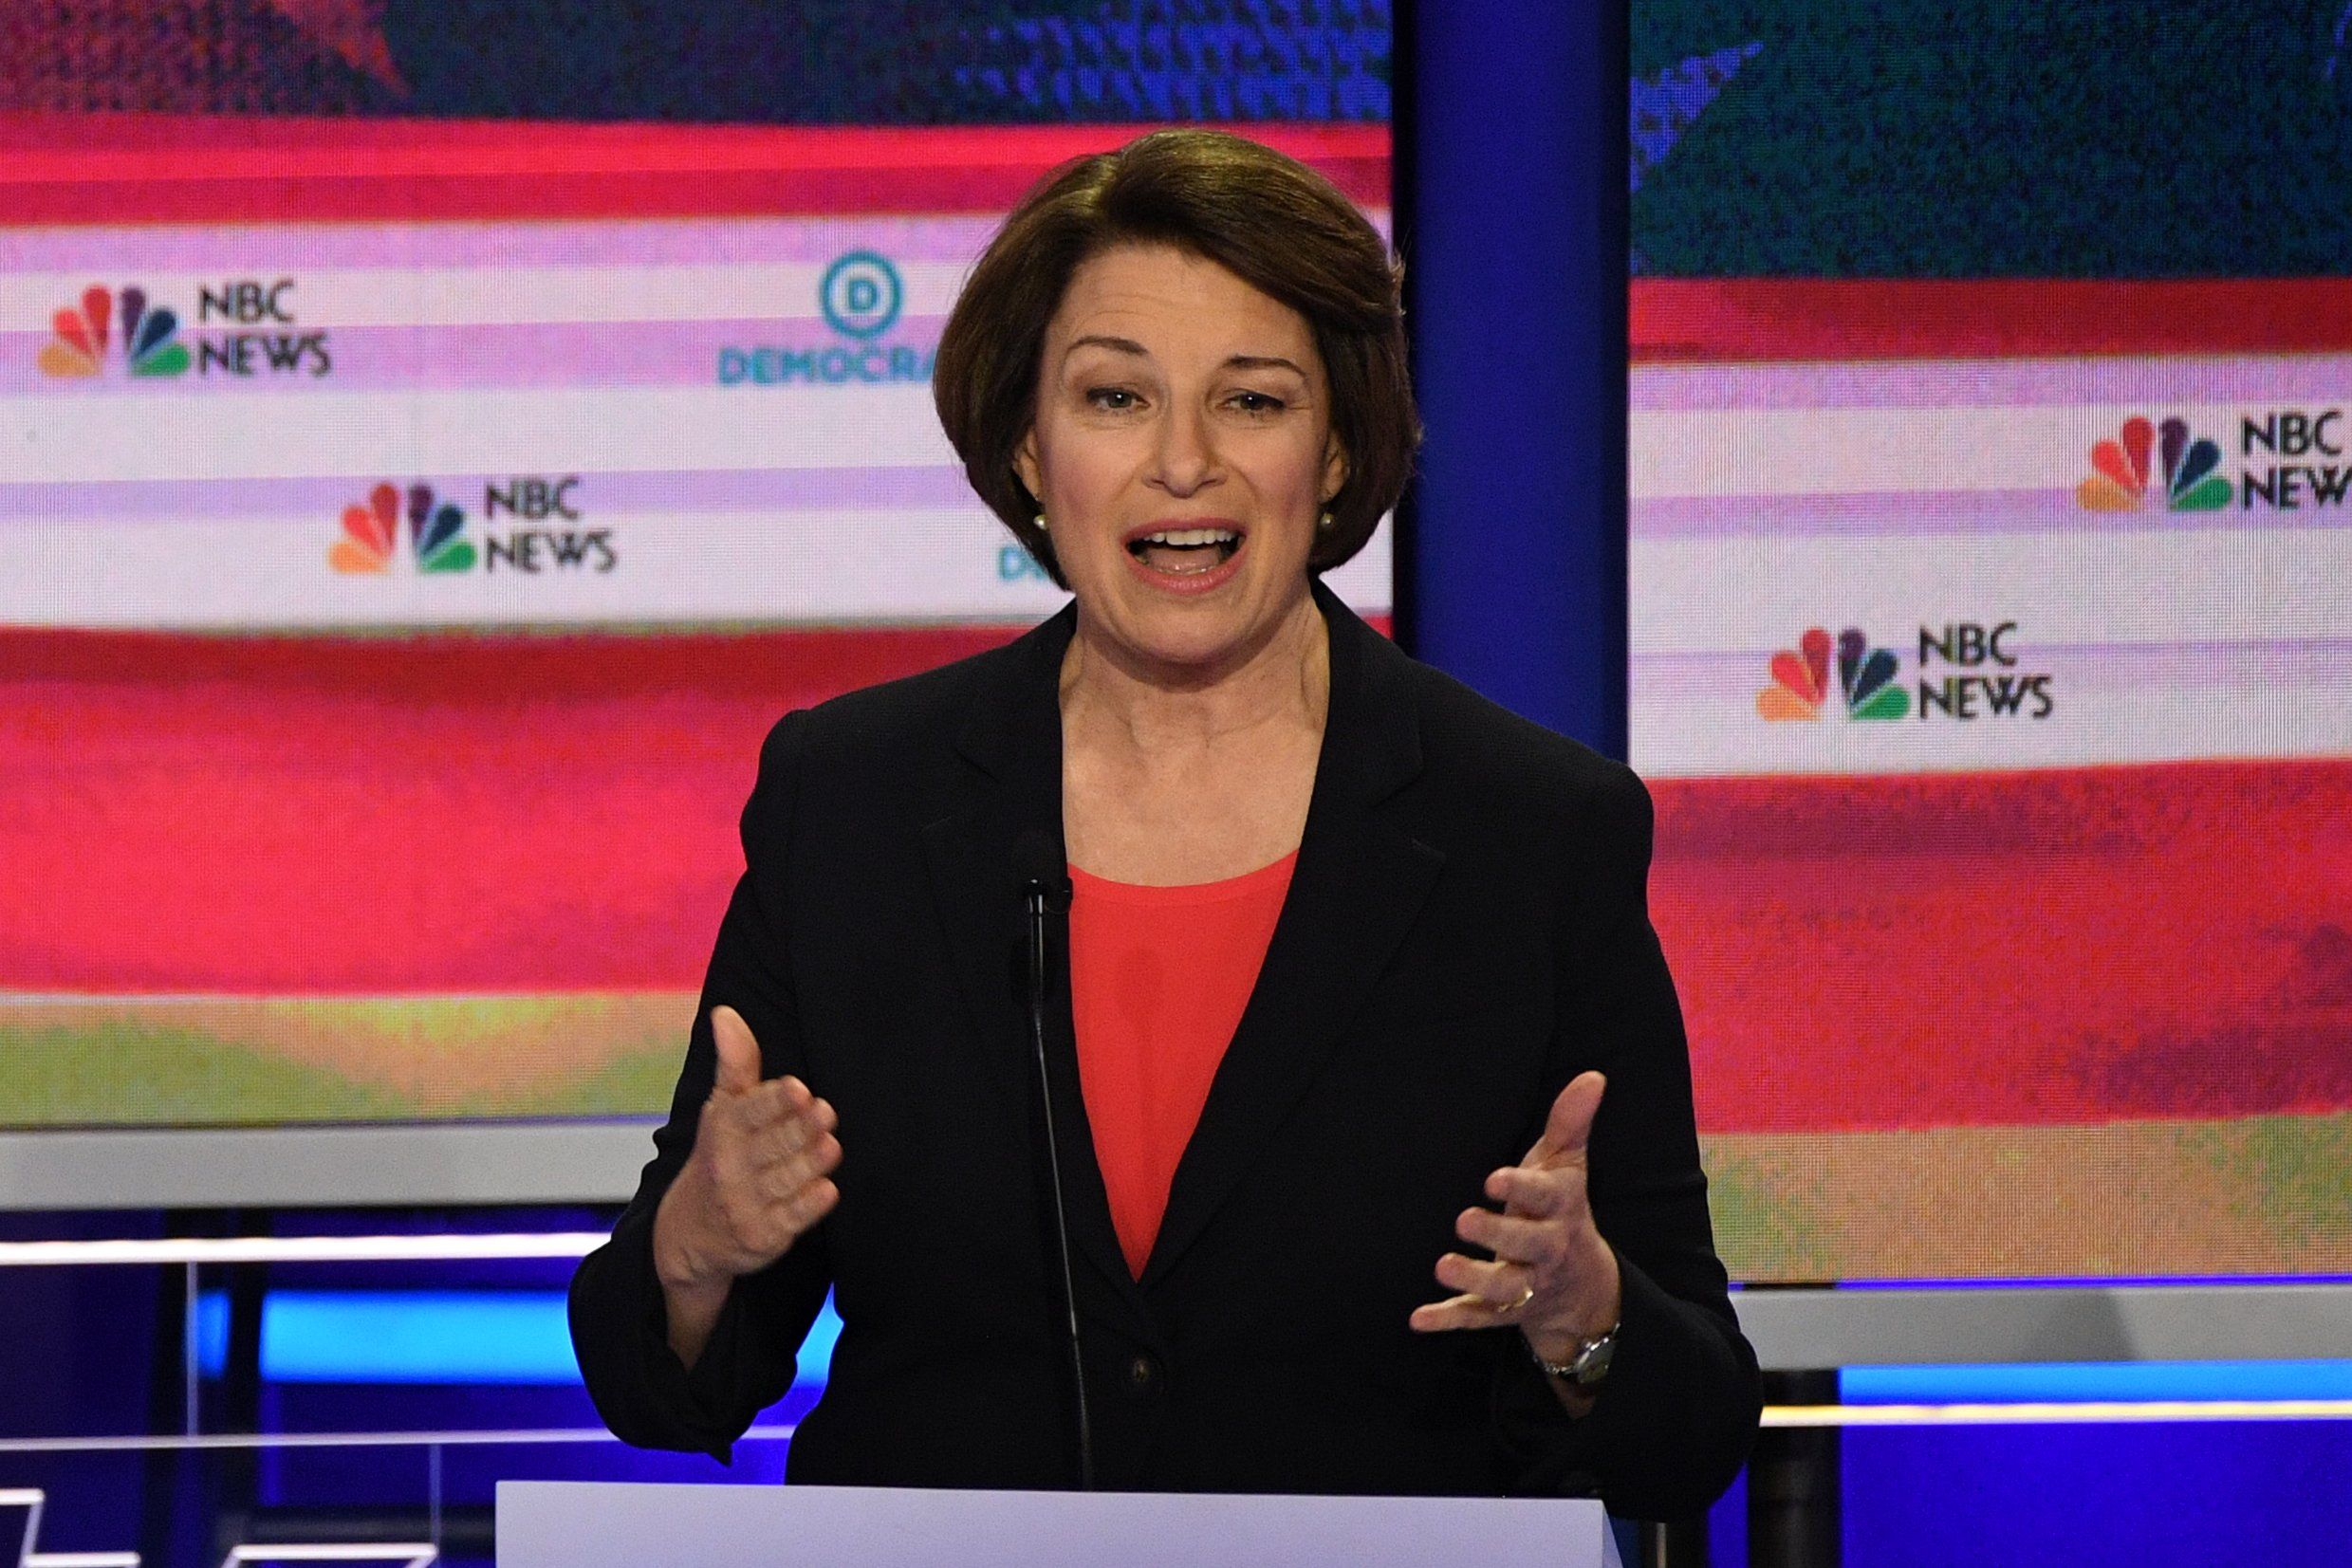 Democratic presidential hopeful U.S. Senator from Minnesota Amy Klobuchar speaks during the first Democratic primary debate of the 2020 presidential campaign at the Adrienne Arsht Center for the Performing Arts in Miami, June 26, 2019. 